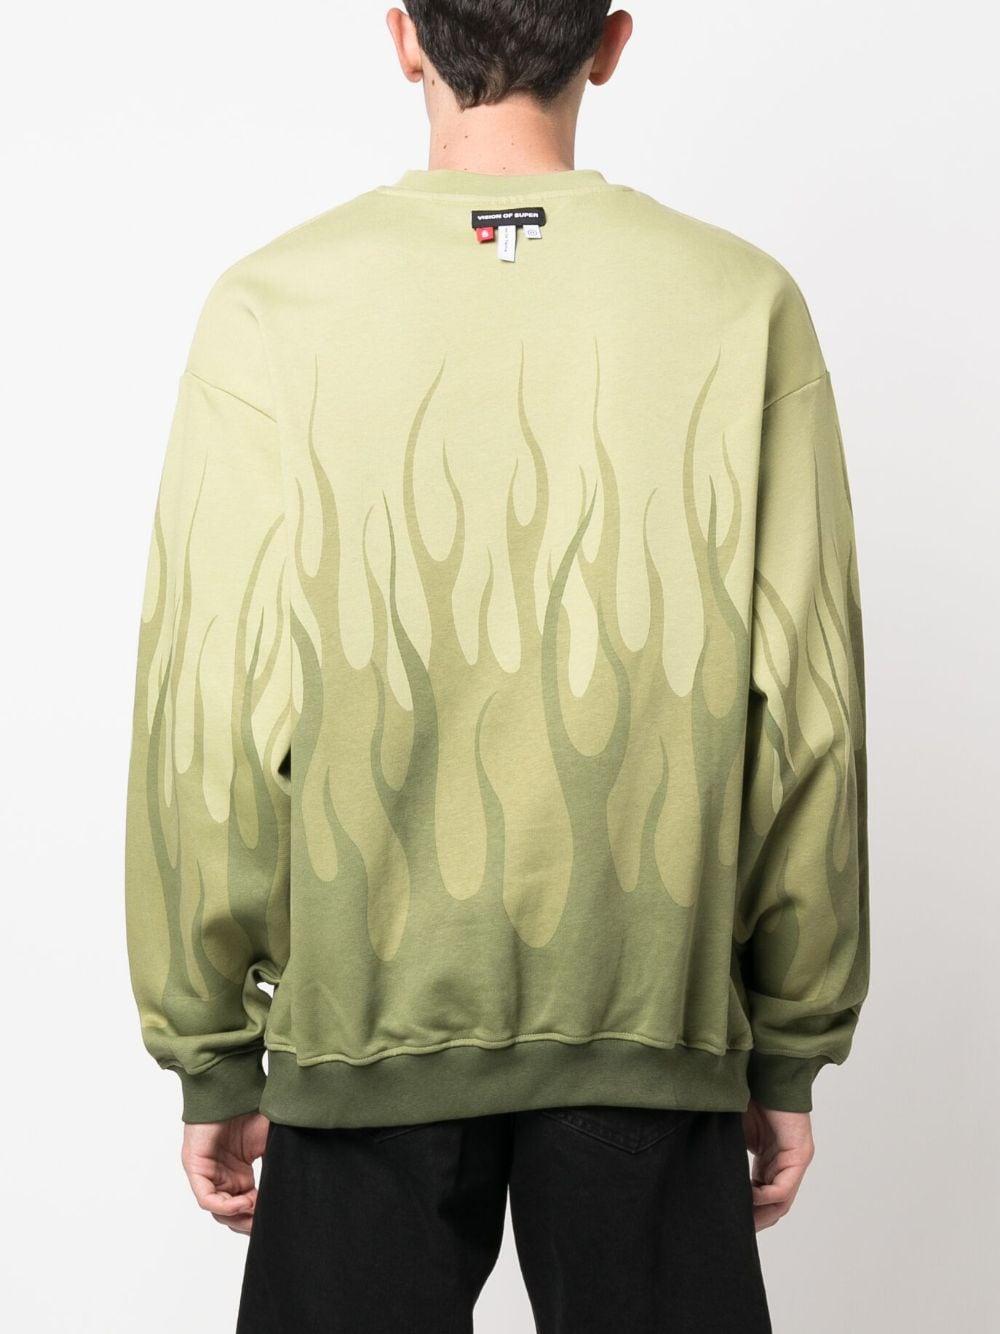 Vision Of Super Flame-printed Sweatshirt in Green for Men | Lyst